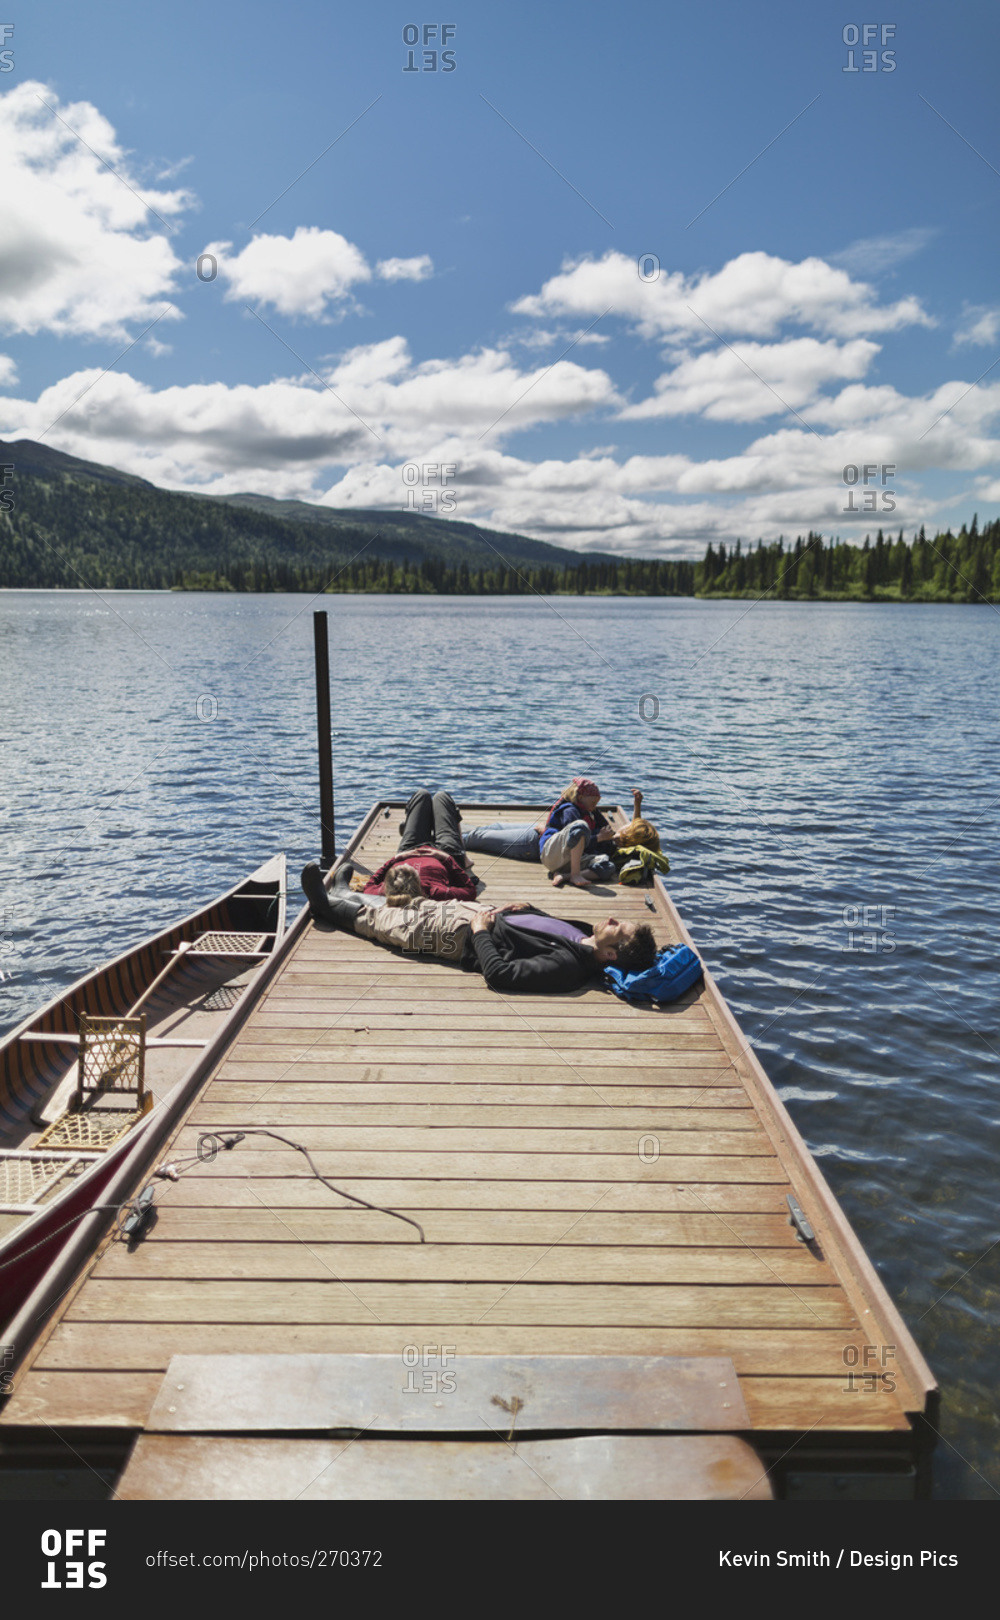 Three adults and a young girl lounging on a boat dock on a lake soaking up the sun, Byers Lake campground, Denali State Park, Alaska, United States of America